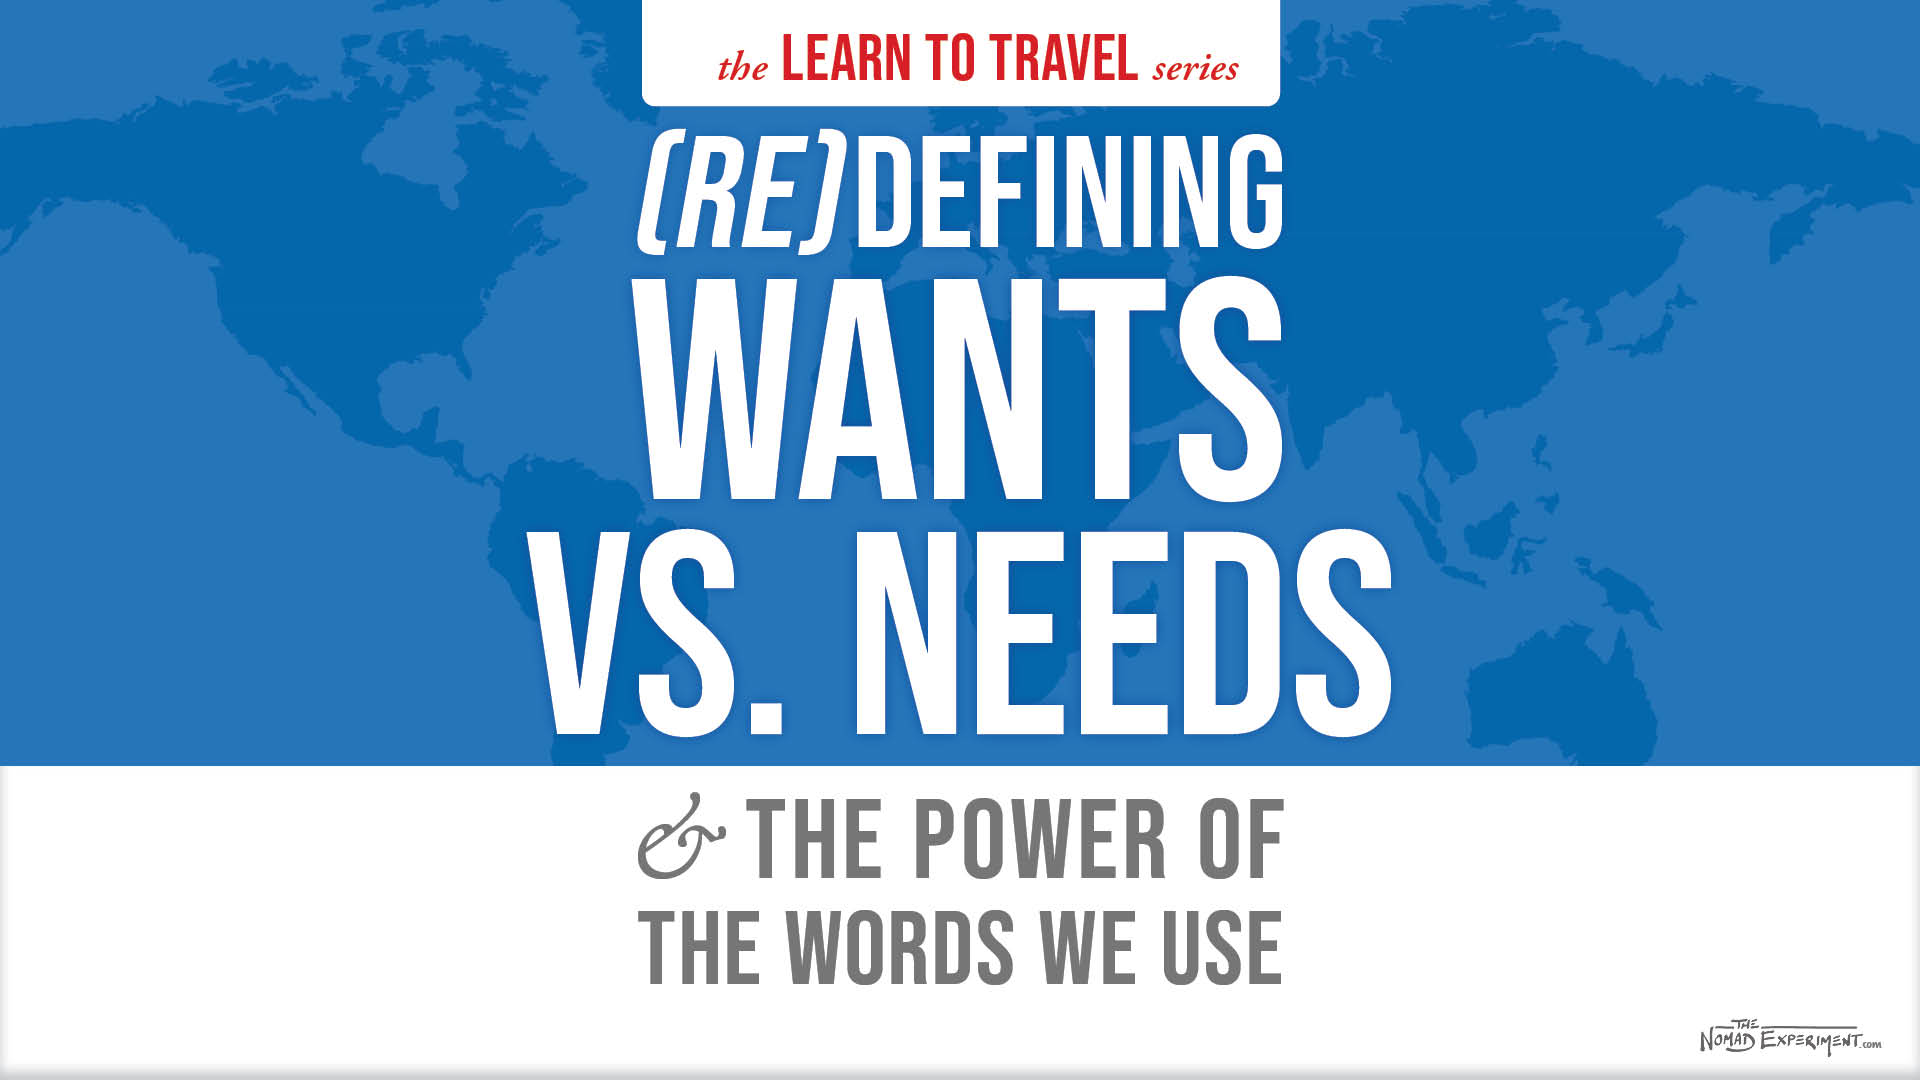 Beginner travel series wants vs needs power of words the nomad experiment